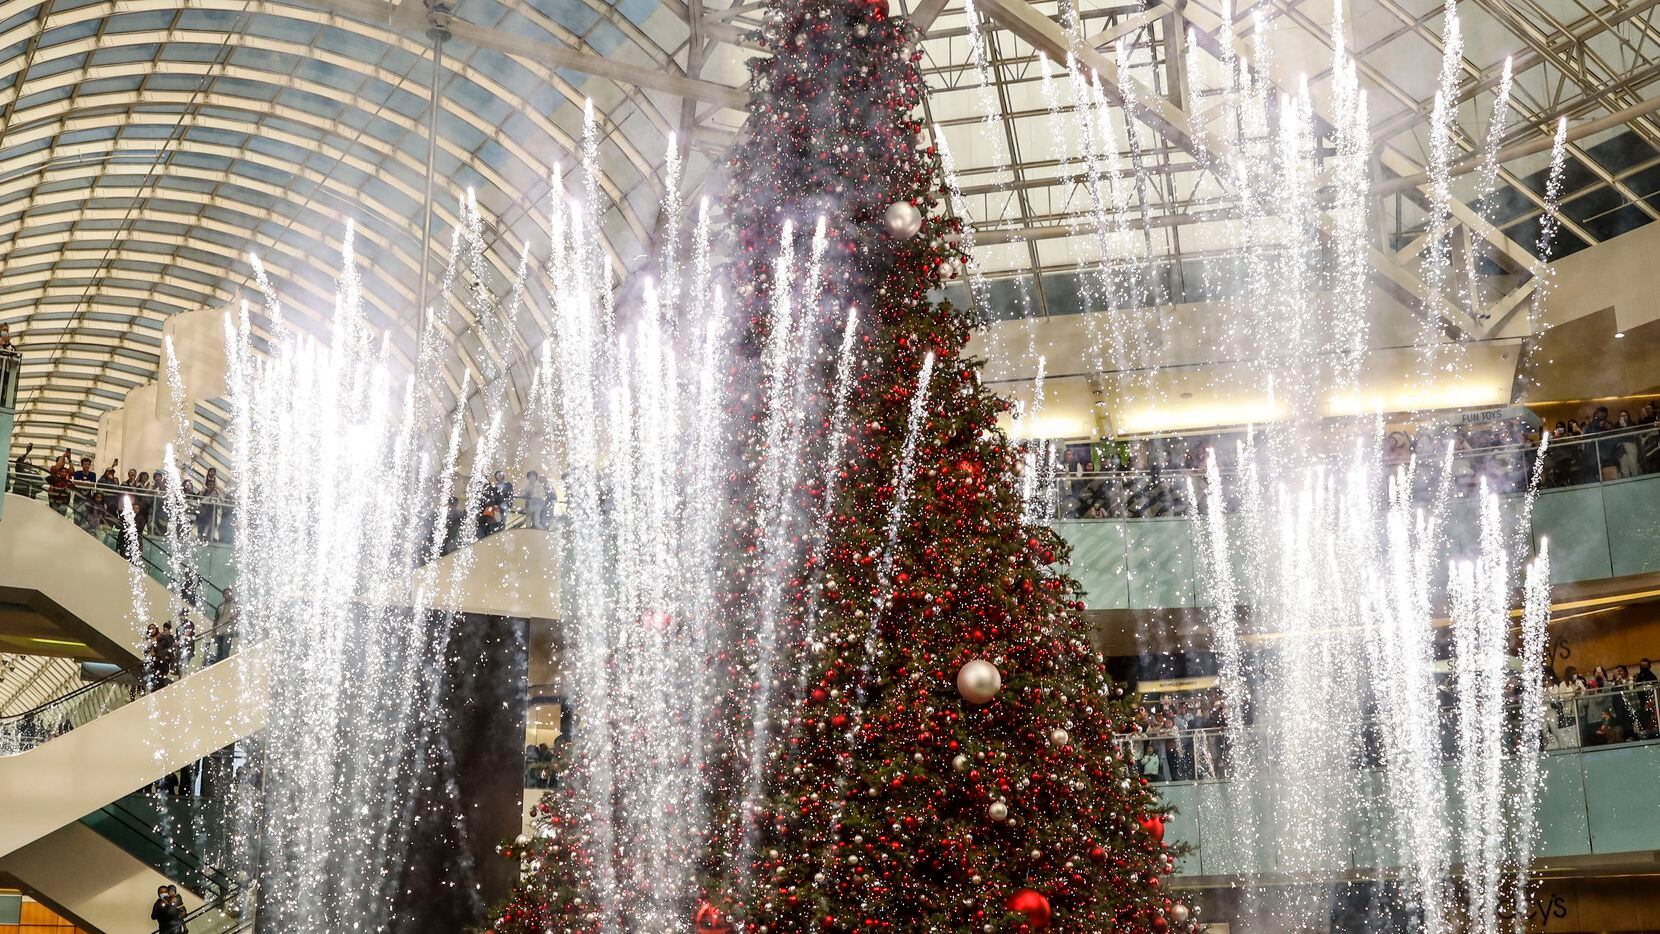 The indoor Christmas tree gets lit during Black Friday at Galleria Dallas. The 95-foot tall...